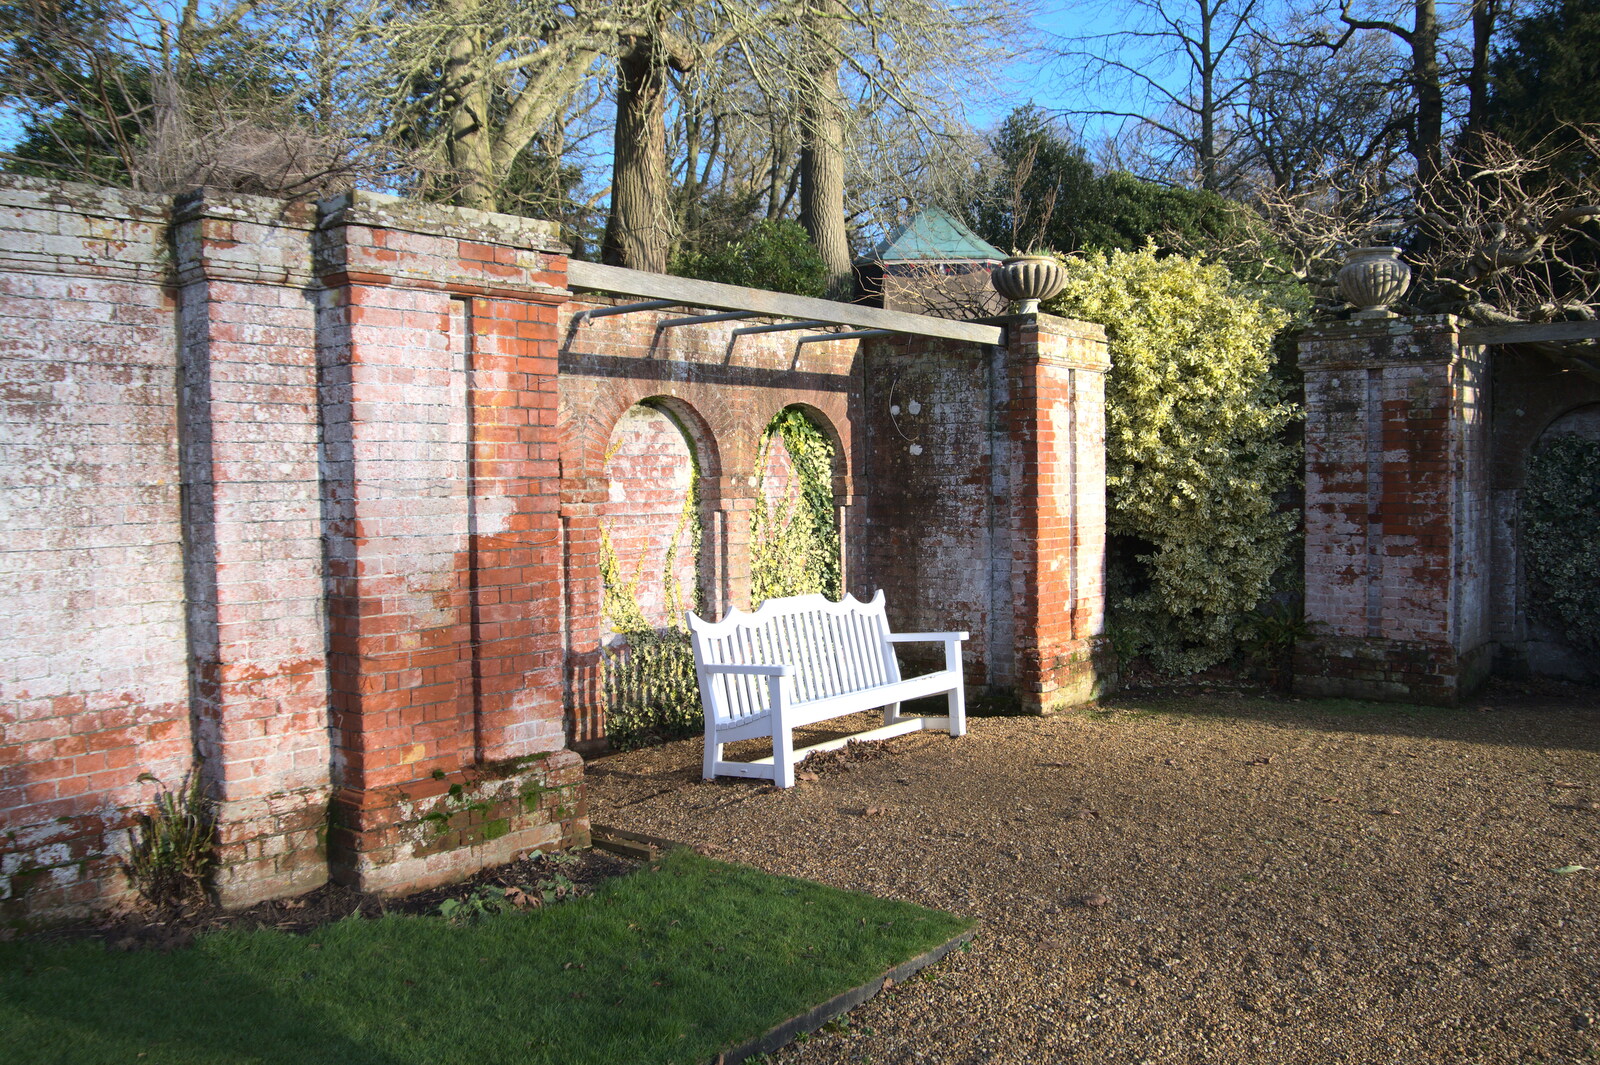 A nice brick corner of the garden from A Visit to Blickling Hall, Aylsham, Norfolk - 9th January 2022